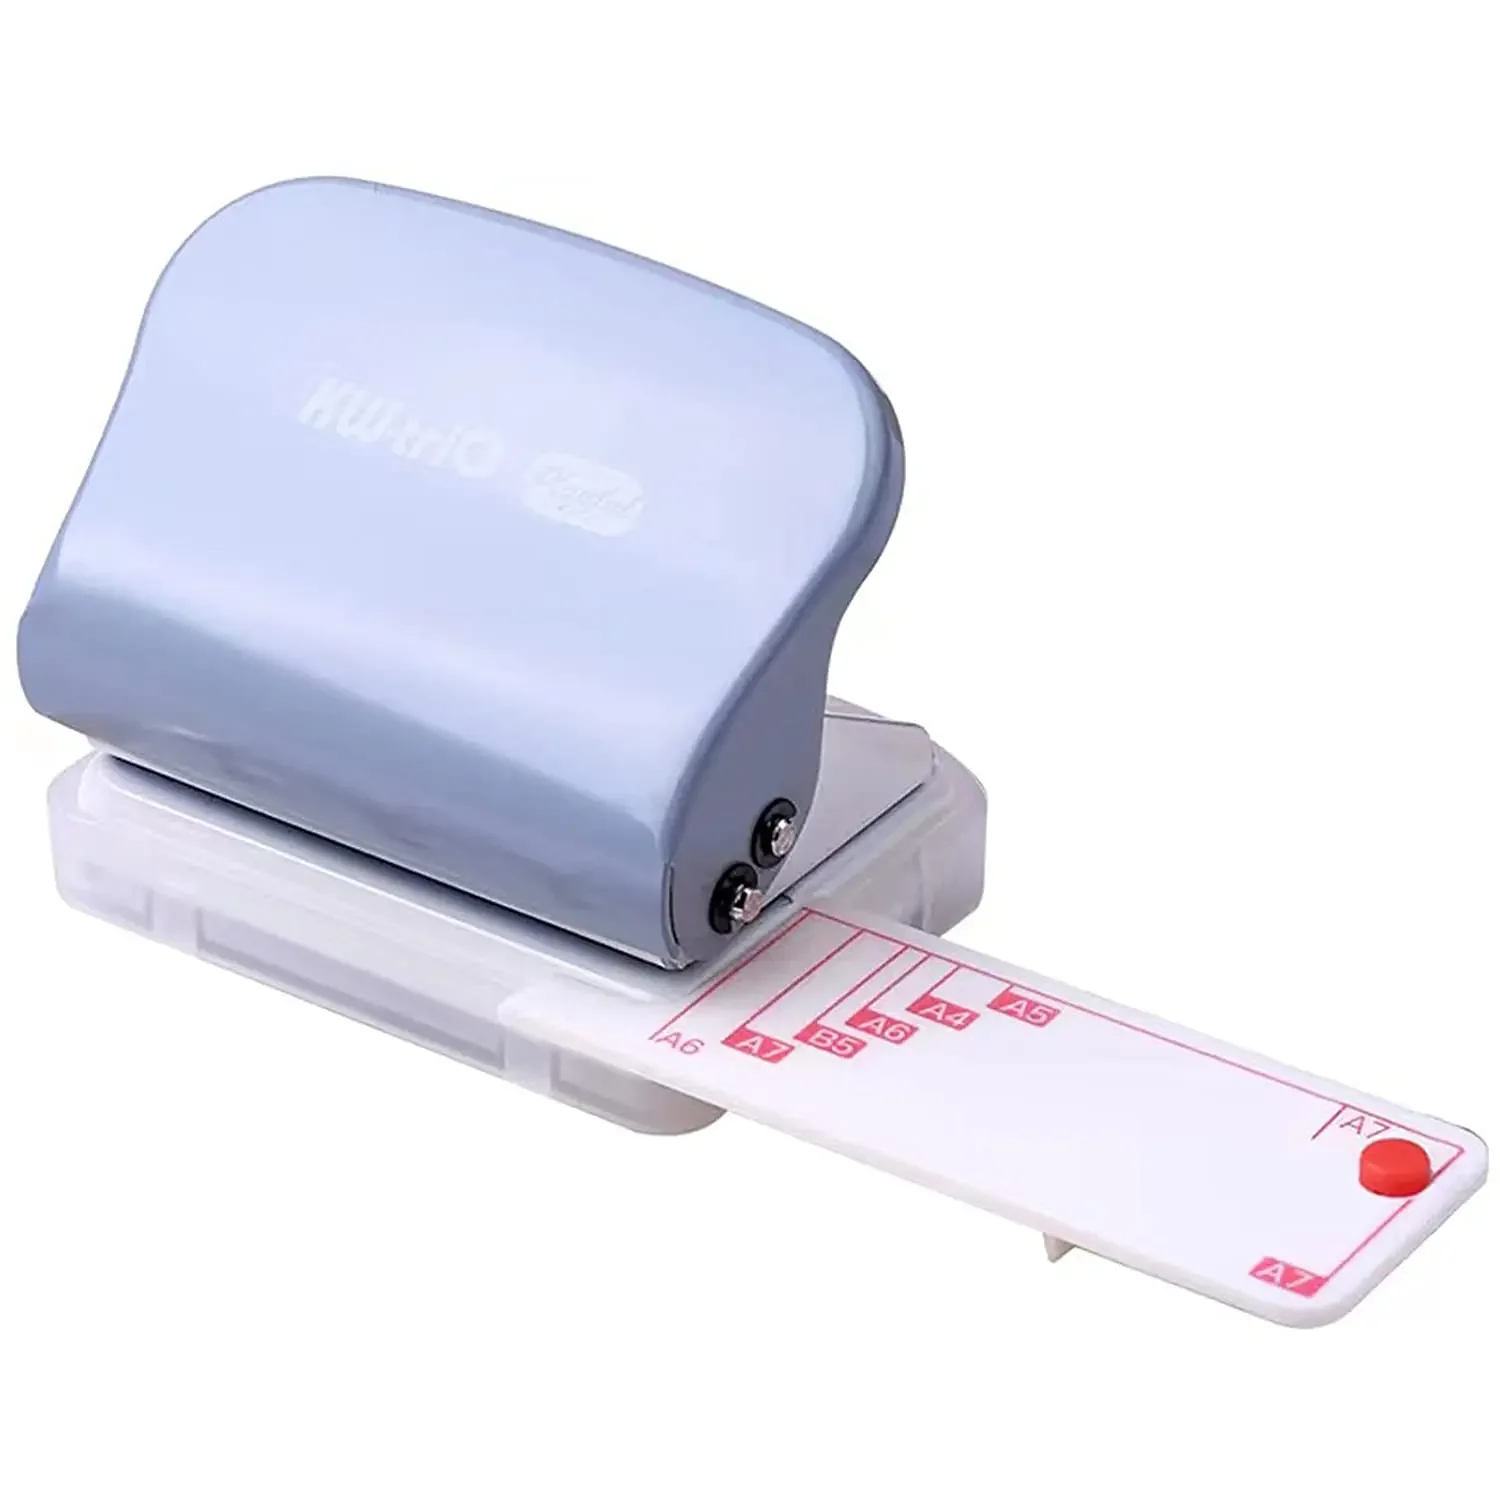 Cute 3/6/10-Hole Paper Punch DIY Portable Handheld Hole Punch Daily Paper  Puncher B5/A5/A6/A7 Size Loose Leaf 5 Sheet Capacity